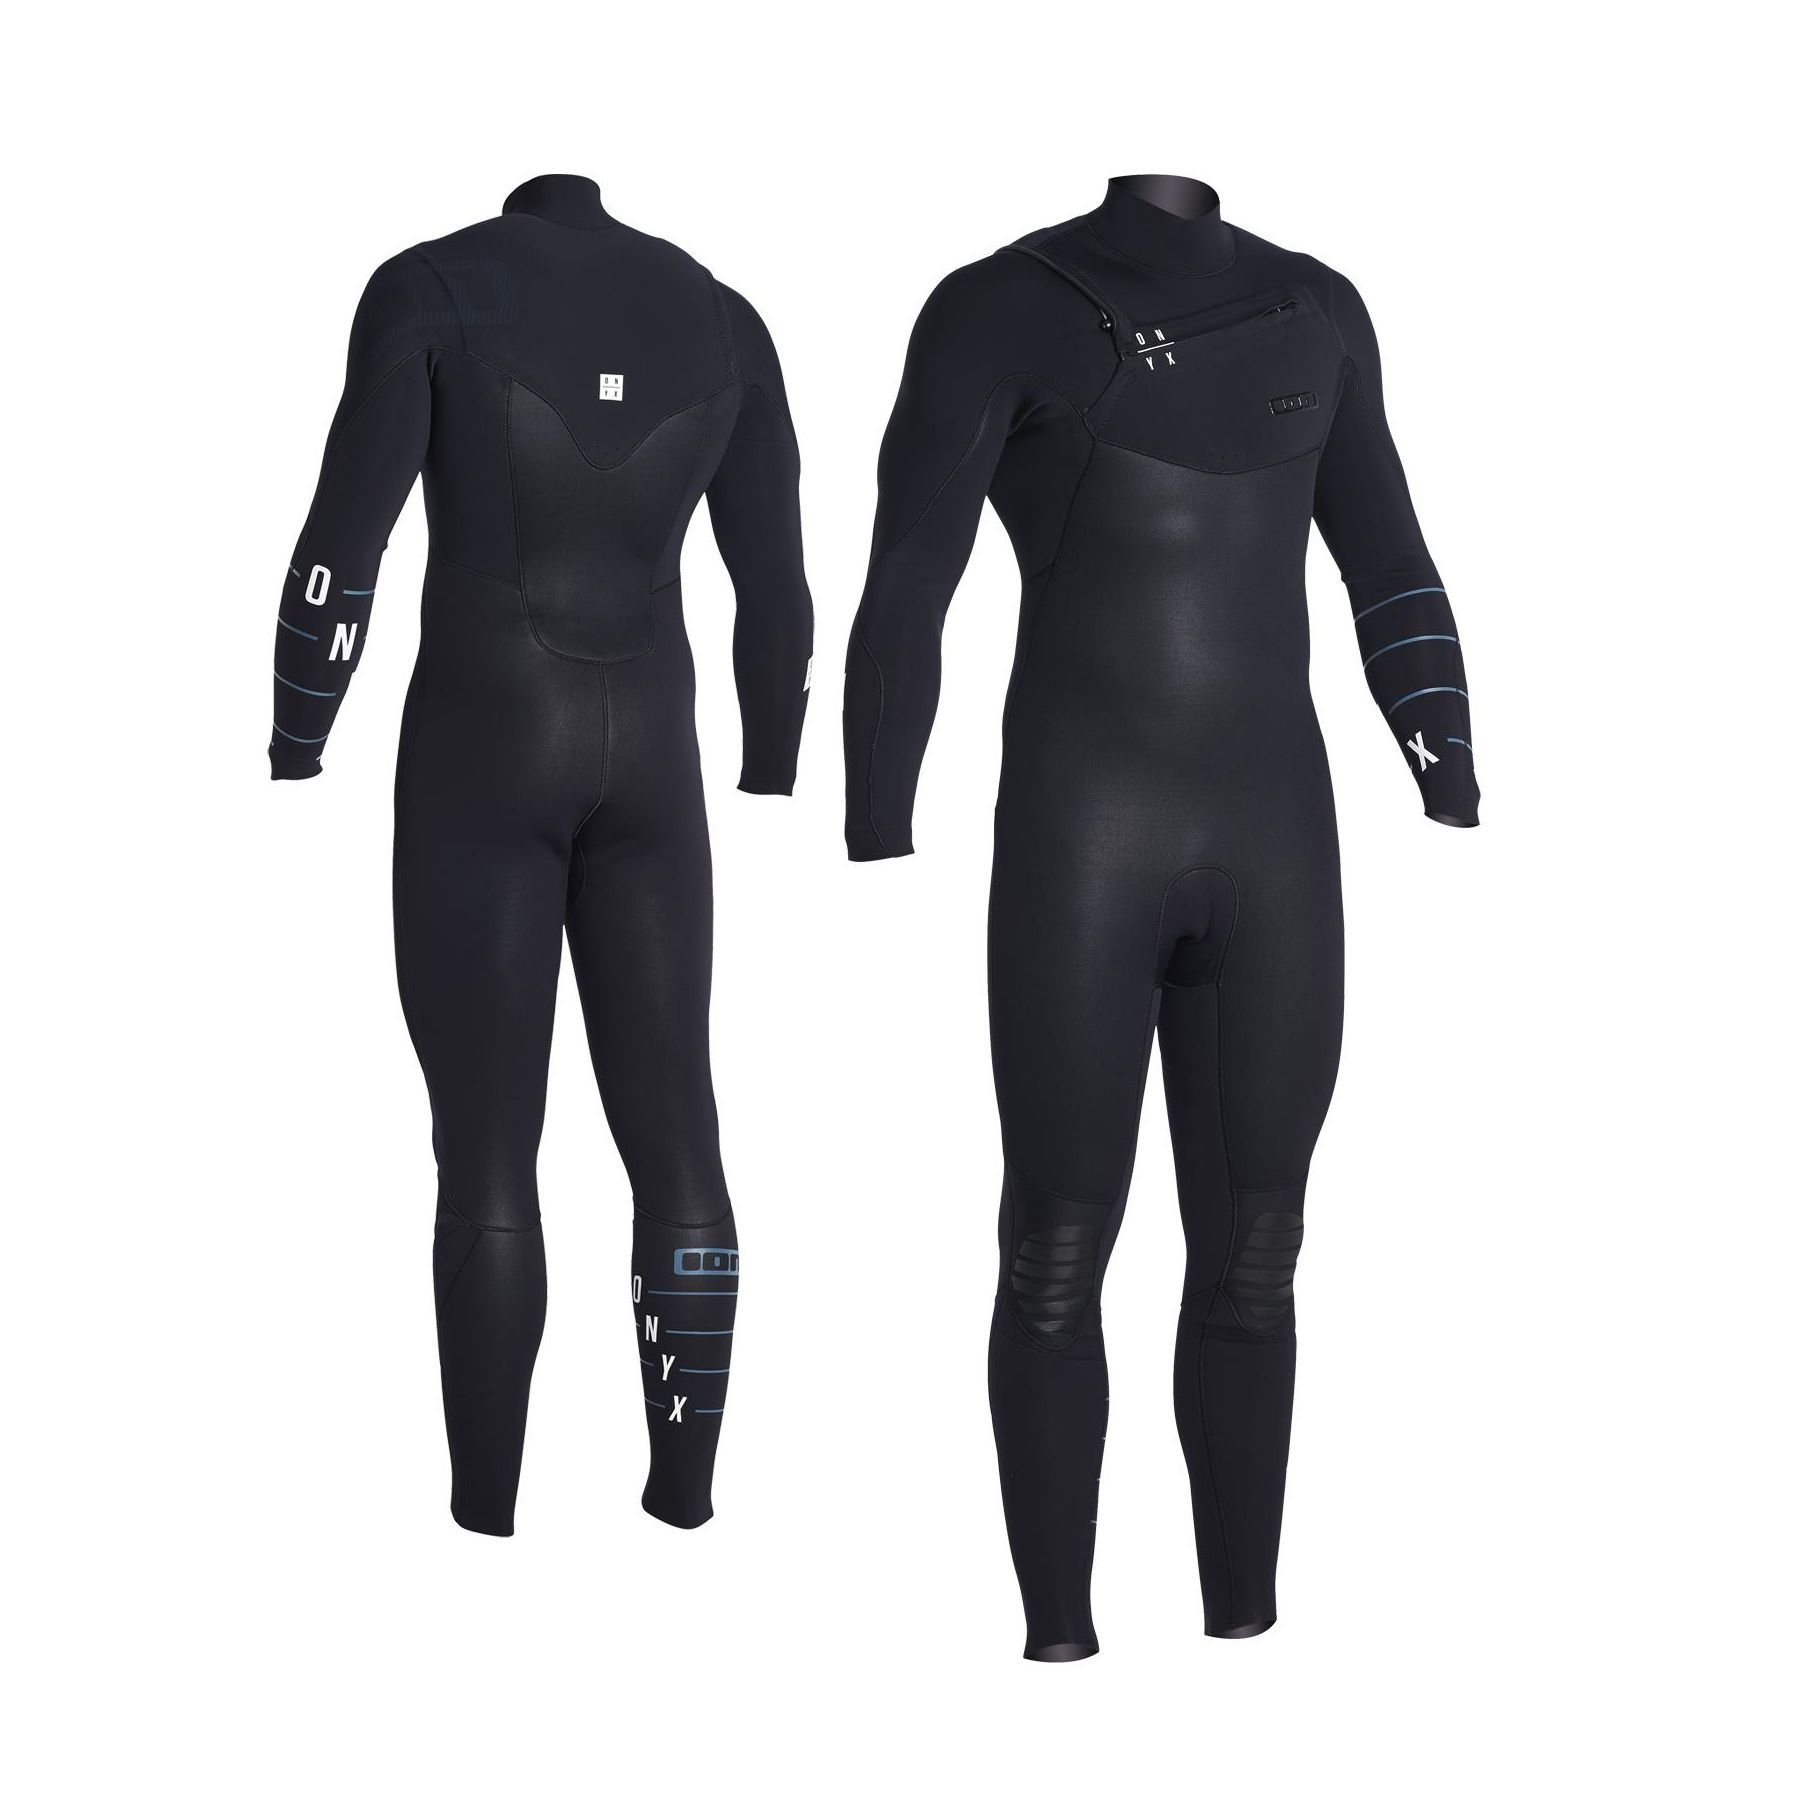 ION Onyx Mens Wetsuit Steamer 3-2mm LS long sleeve high quality winter surfing 